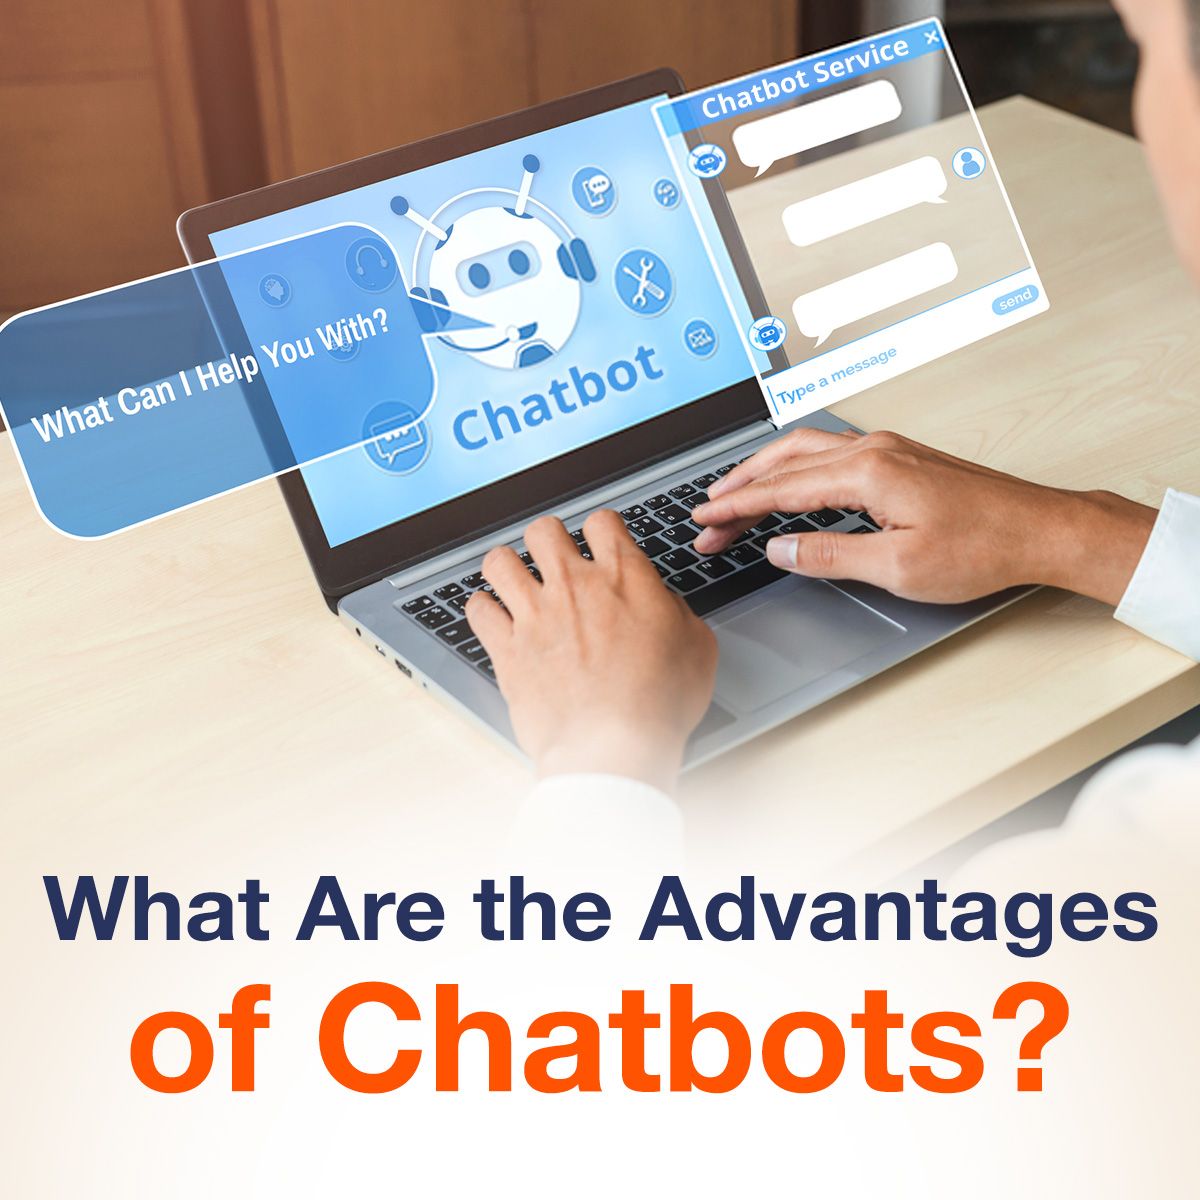 What Are the Advantages of Chatbots?